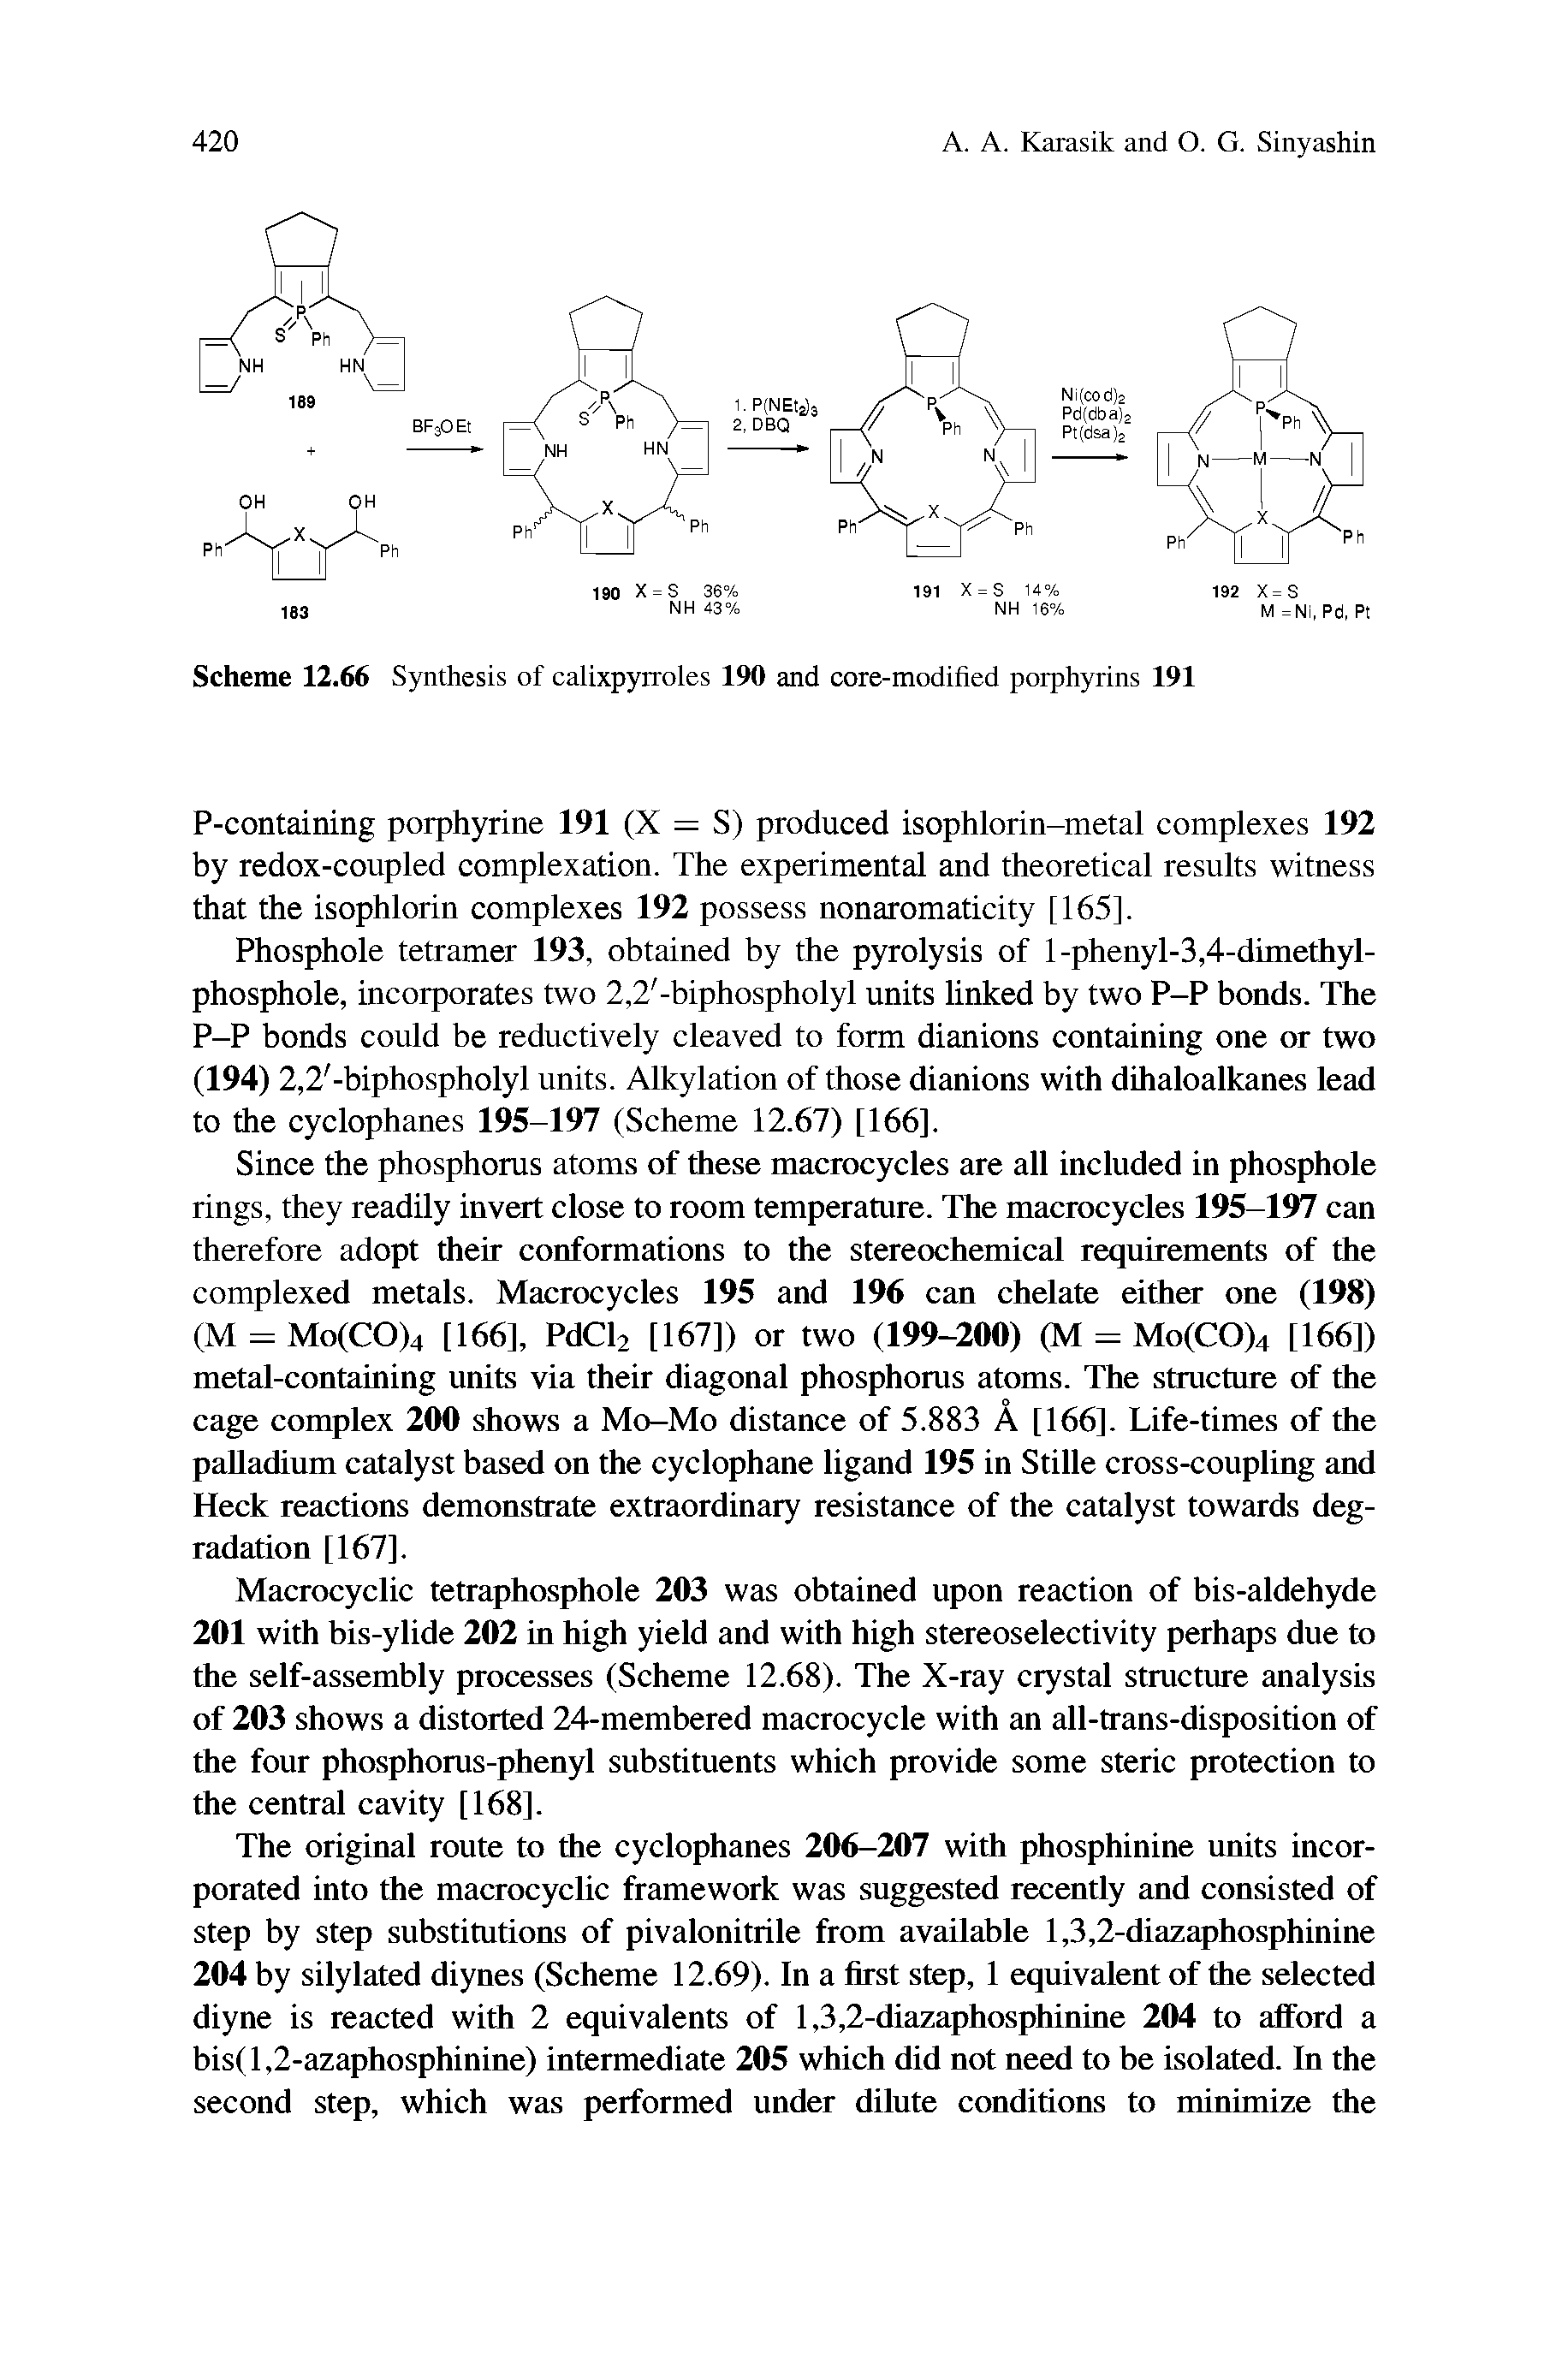 Scheme 12.66 Synthesis of calixpyiroles 190 and core-modified porphyrins 191...